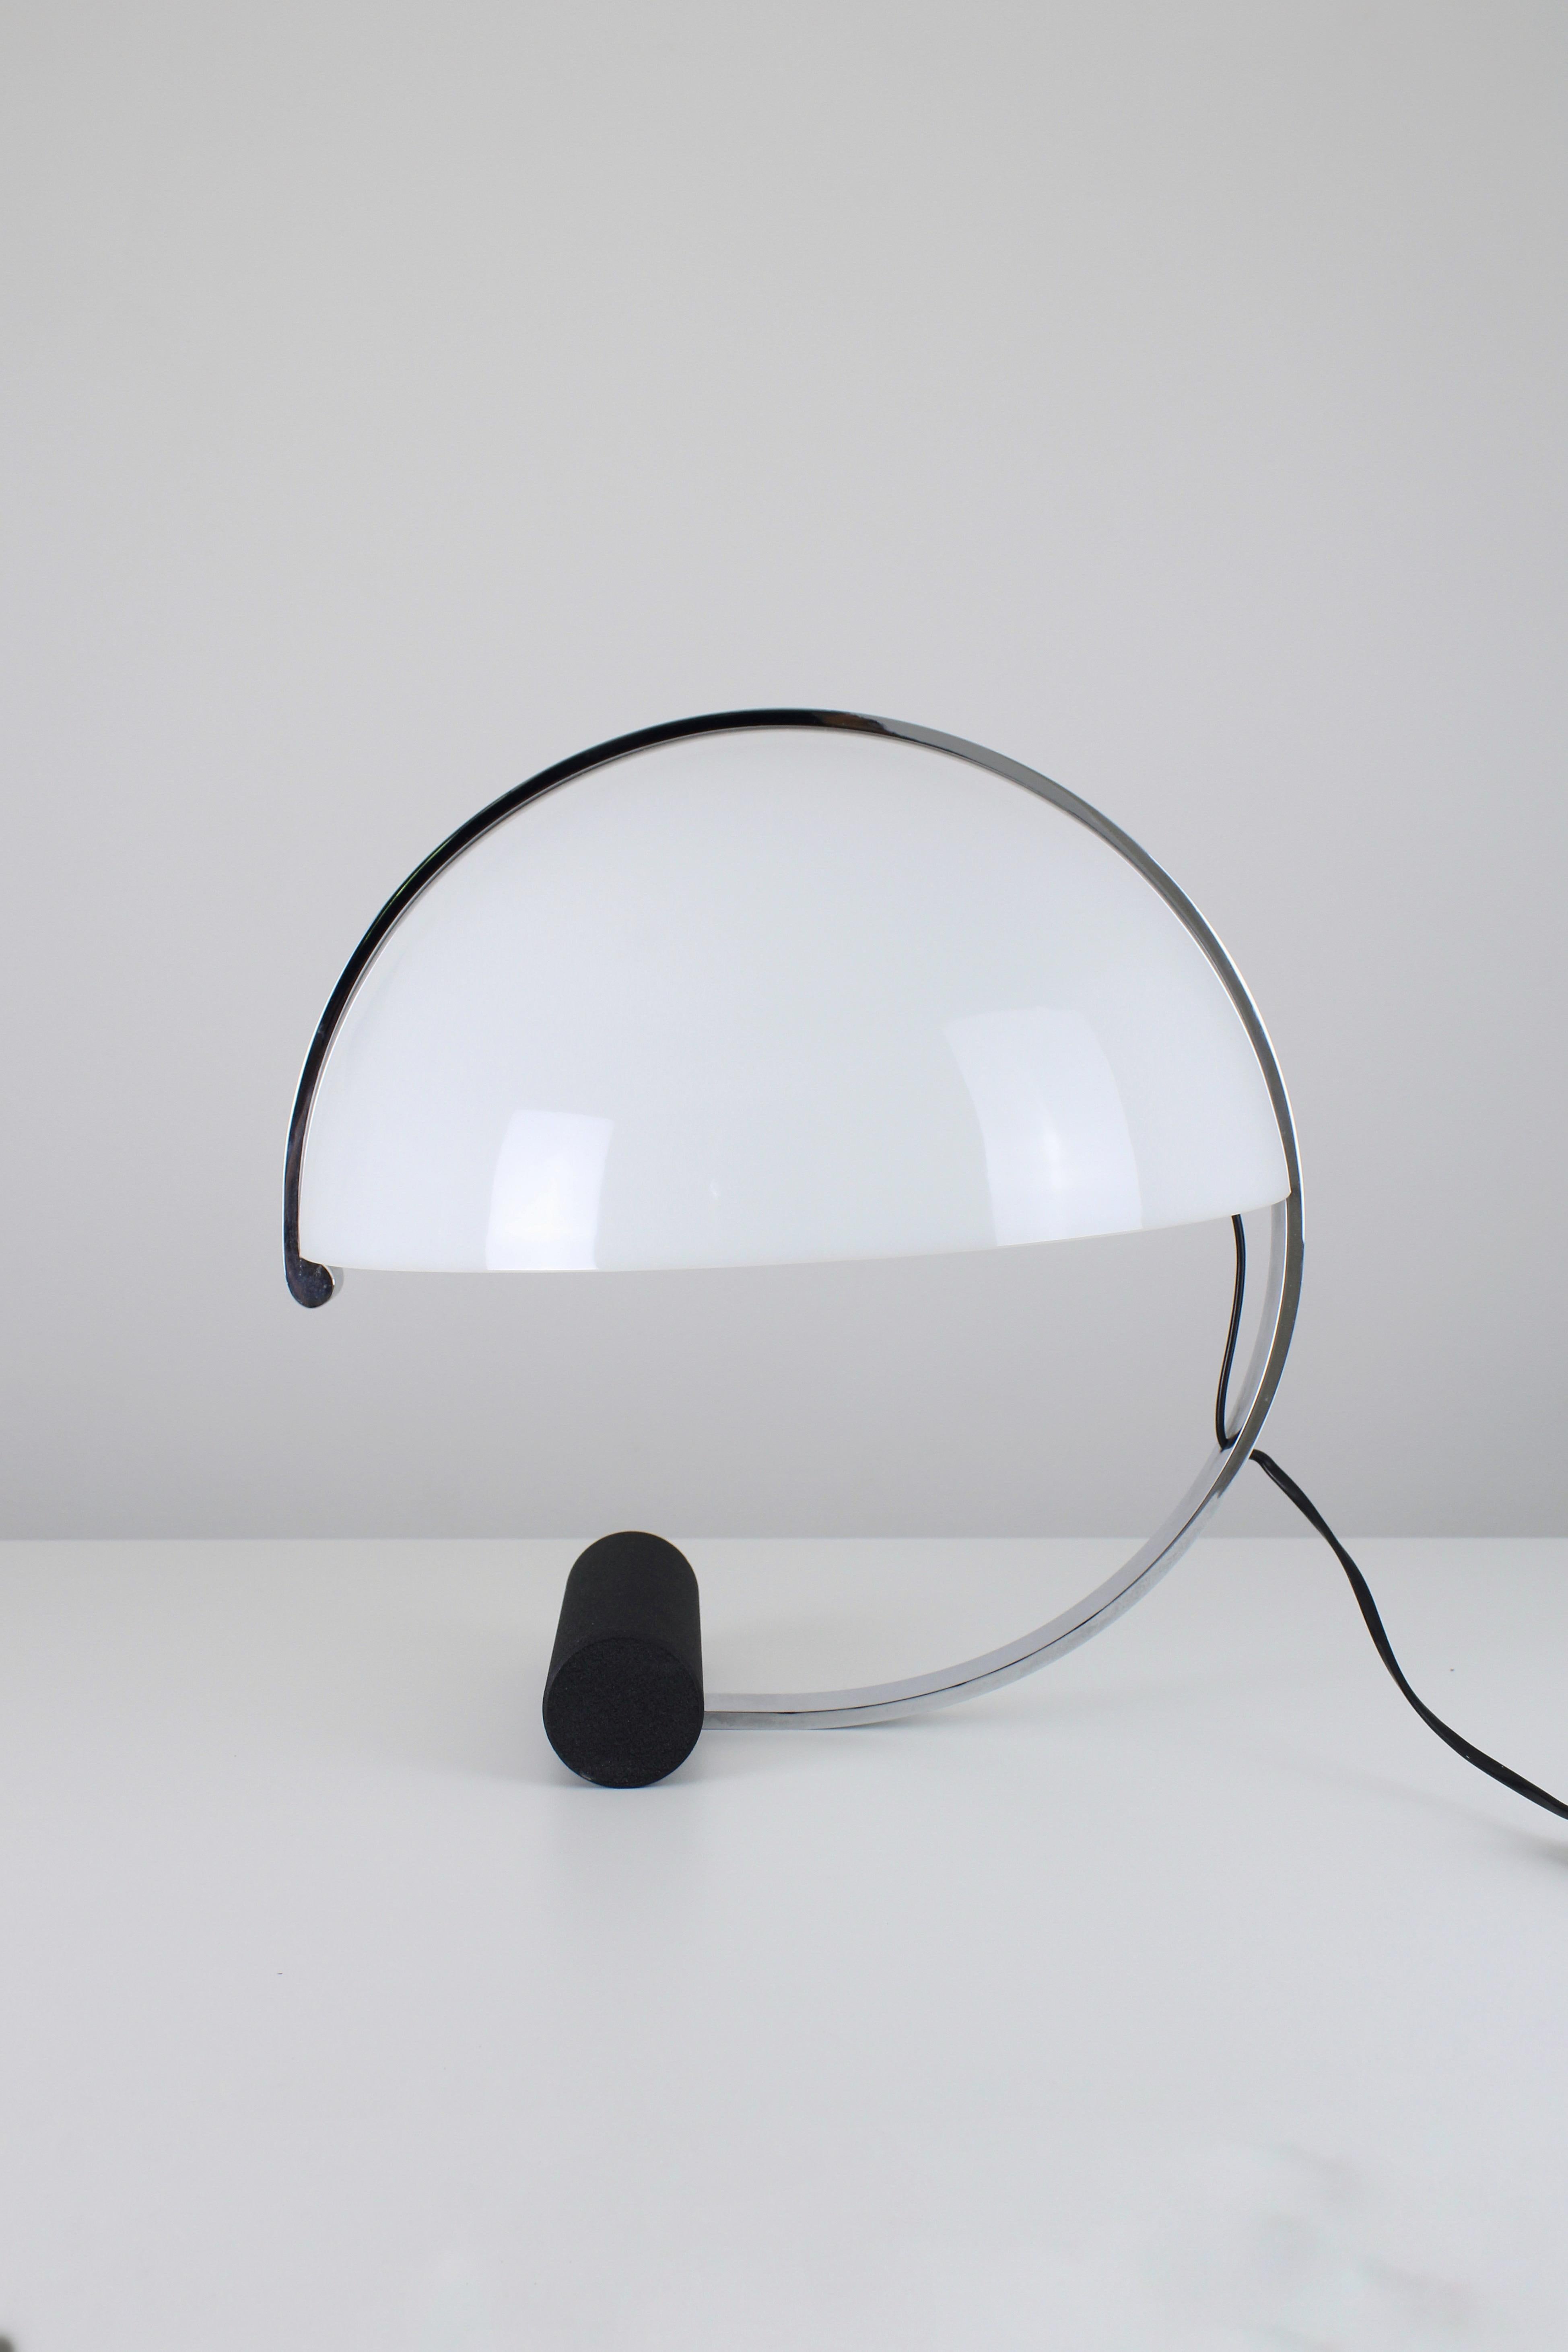 Stunning desk lamp designed by Stilnovo for the Dutch company Artimeta in the 1970s.
The design of this lamp consists of a round chrome rod holding a white perplex shade. A good example of high quality and fine Italian design. Original and in very